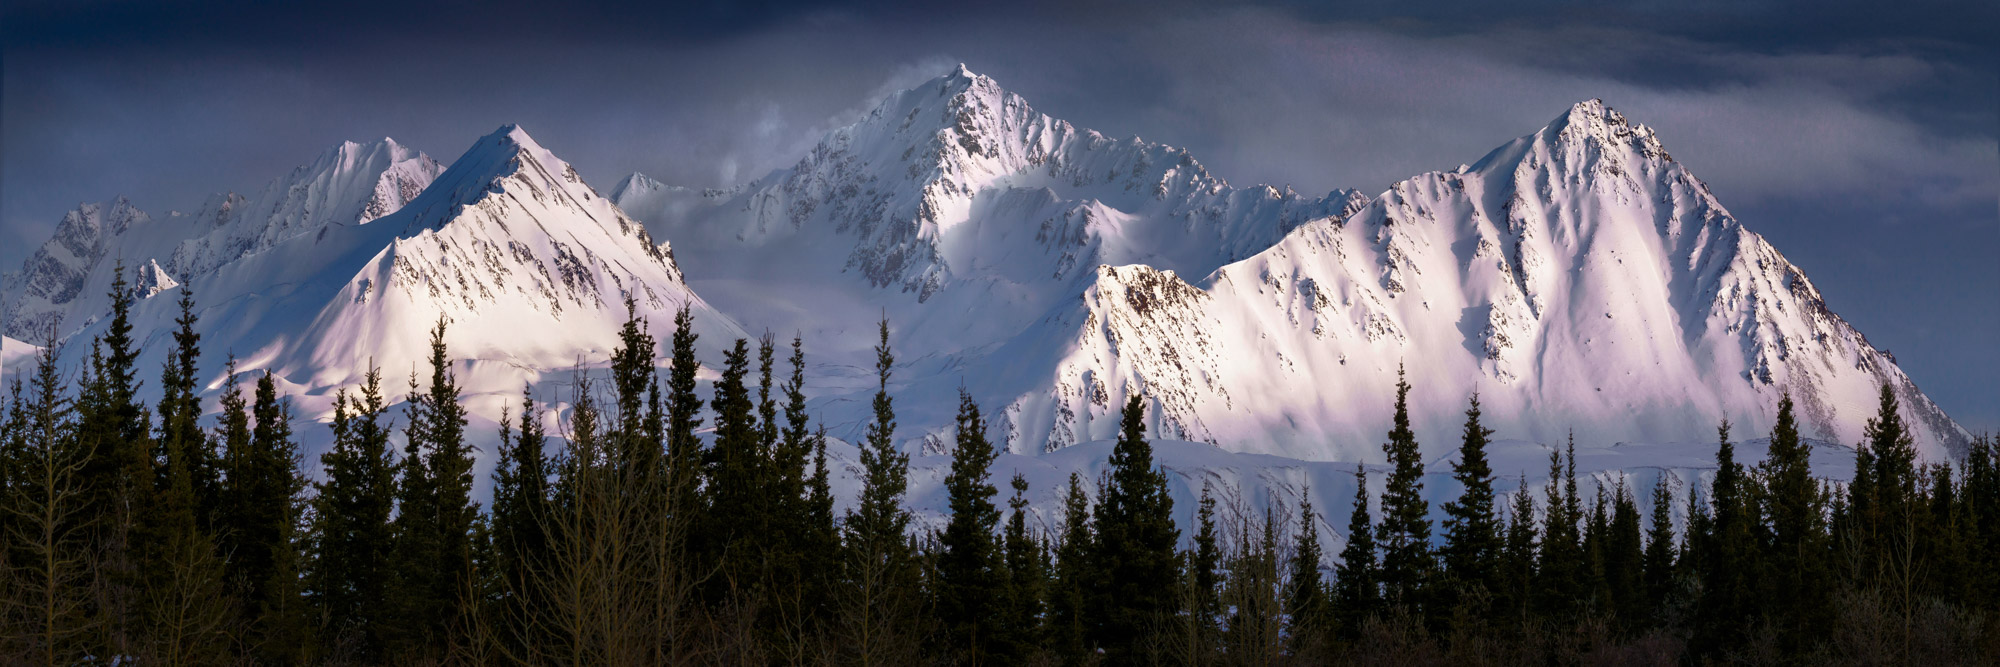 snow covered mountains in alaska